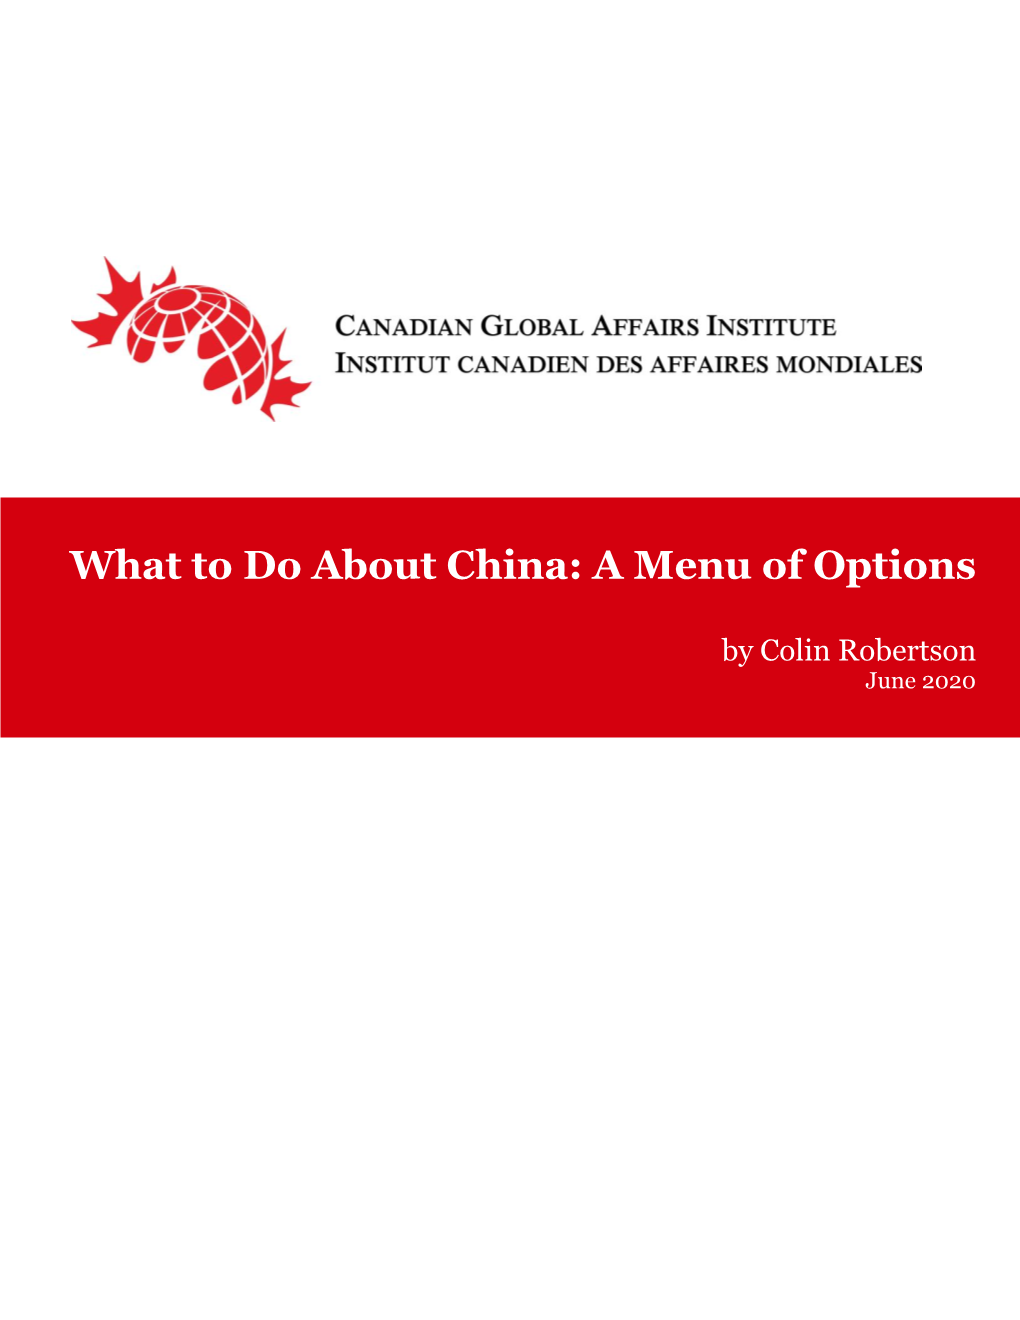 What to Do About China: a Menu of Options